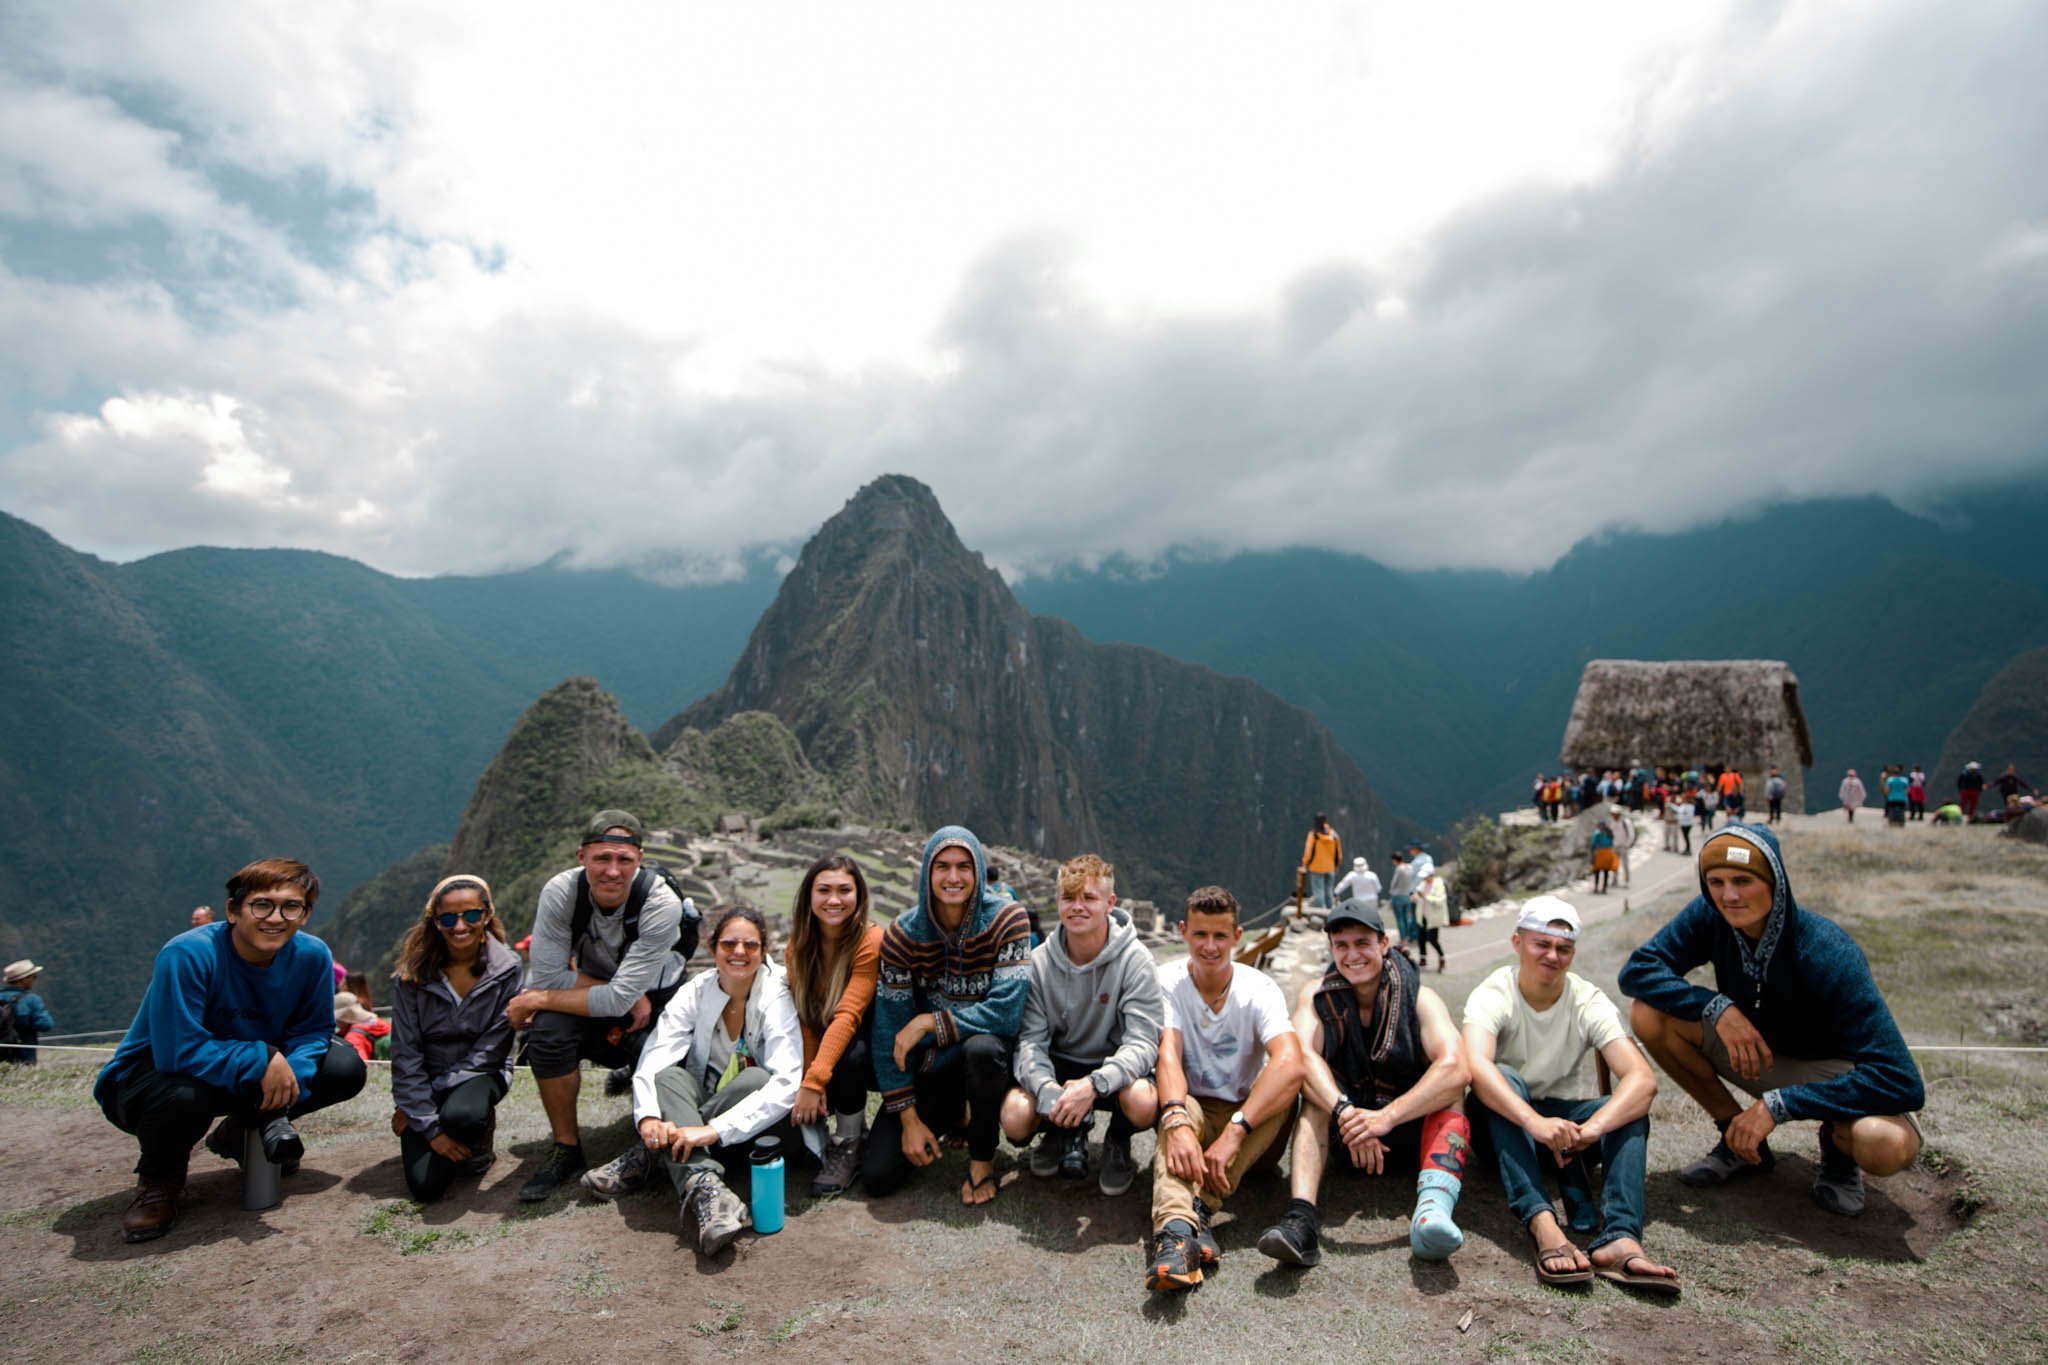 TrovaTrip group of travelers sitting down in front of Machu Picchu in Peru